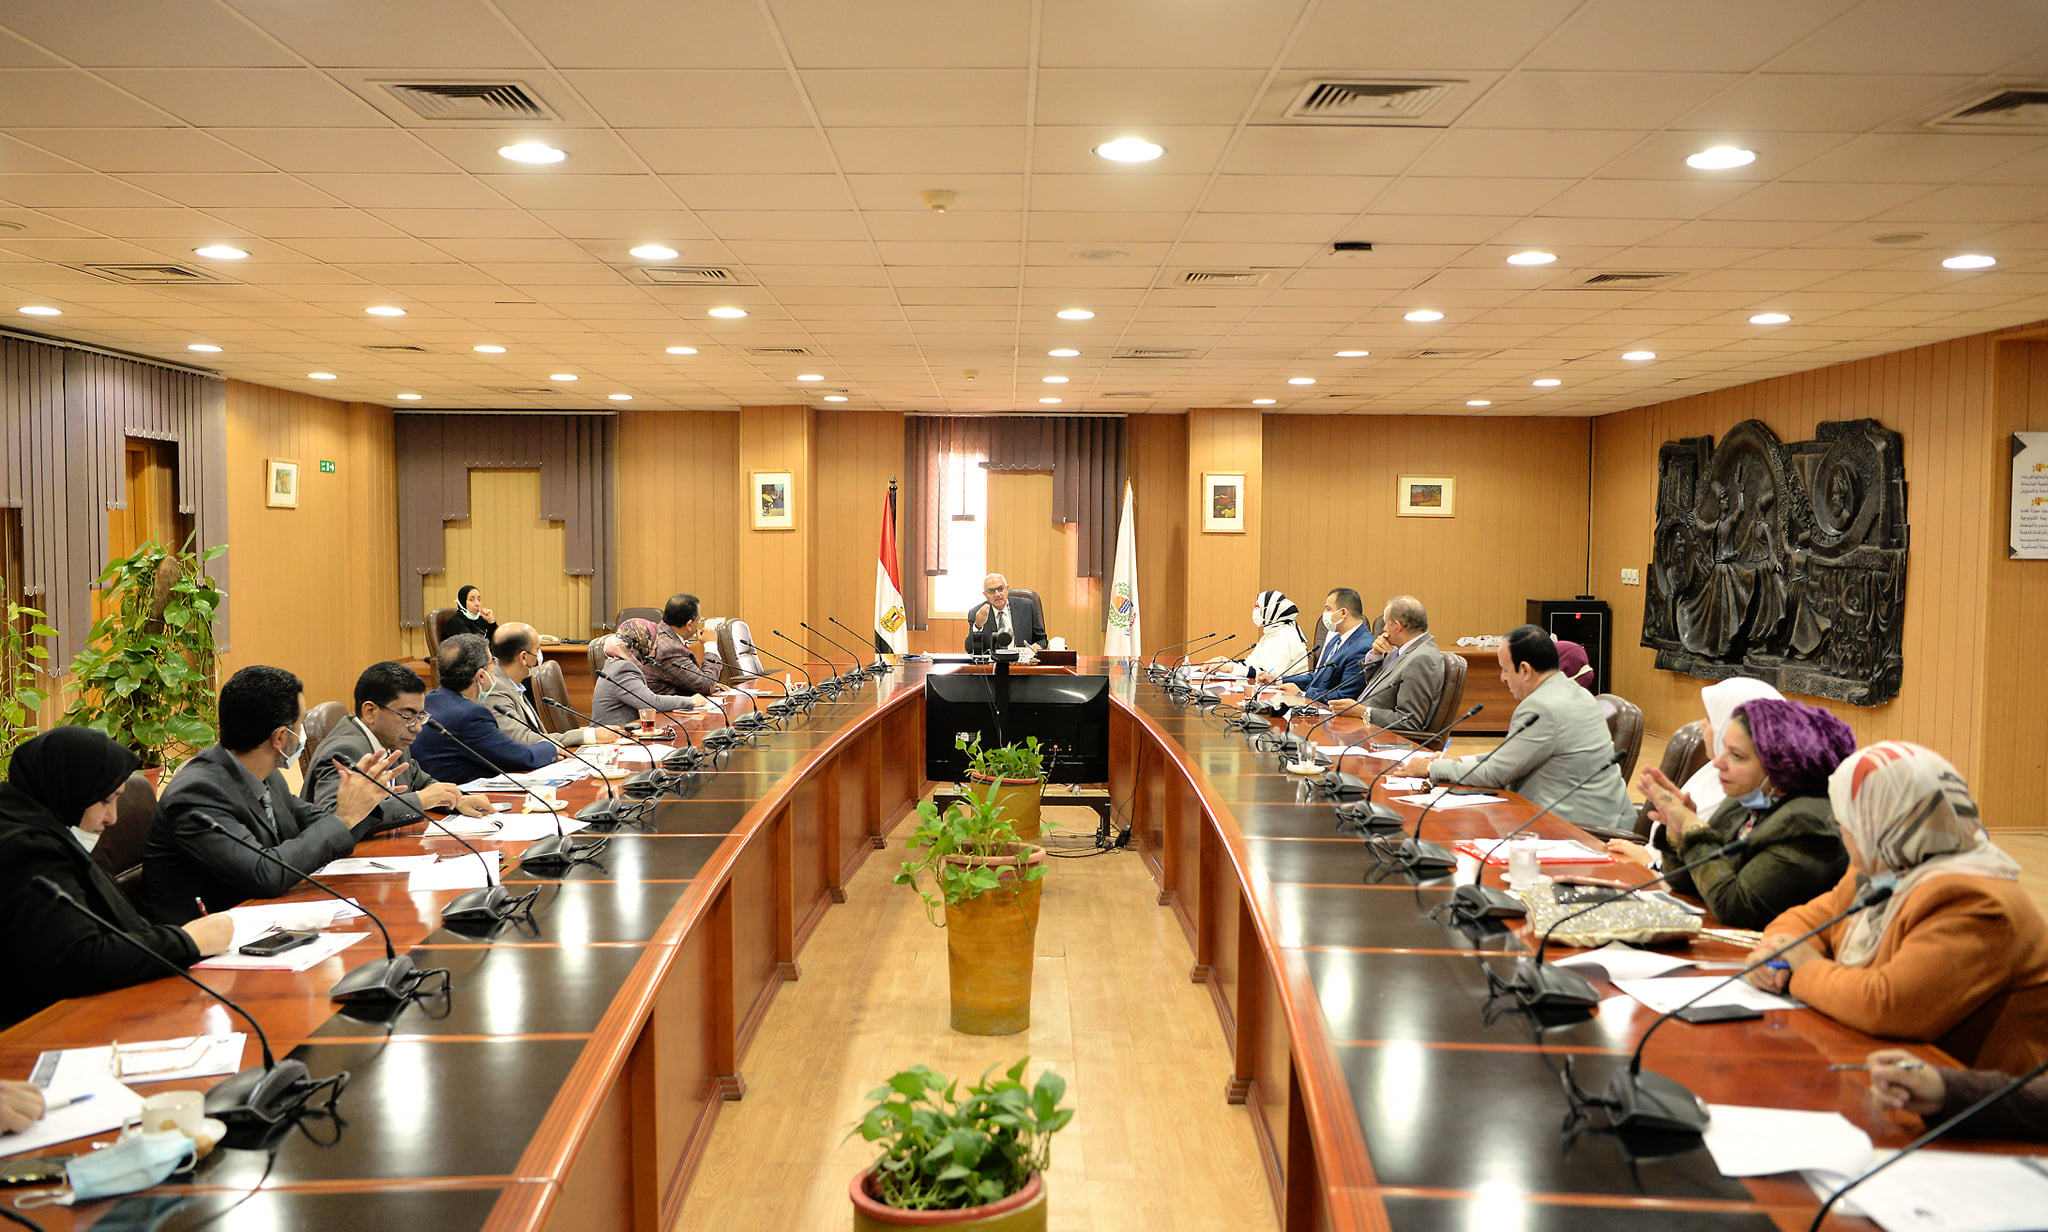 The meeting of President of Mansoura University and the Director of Mansoura University Quality Assurance and Assessment Center with the unaccredited faculties